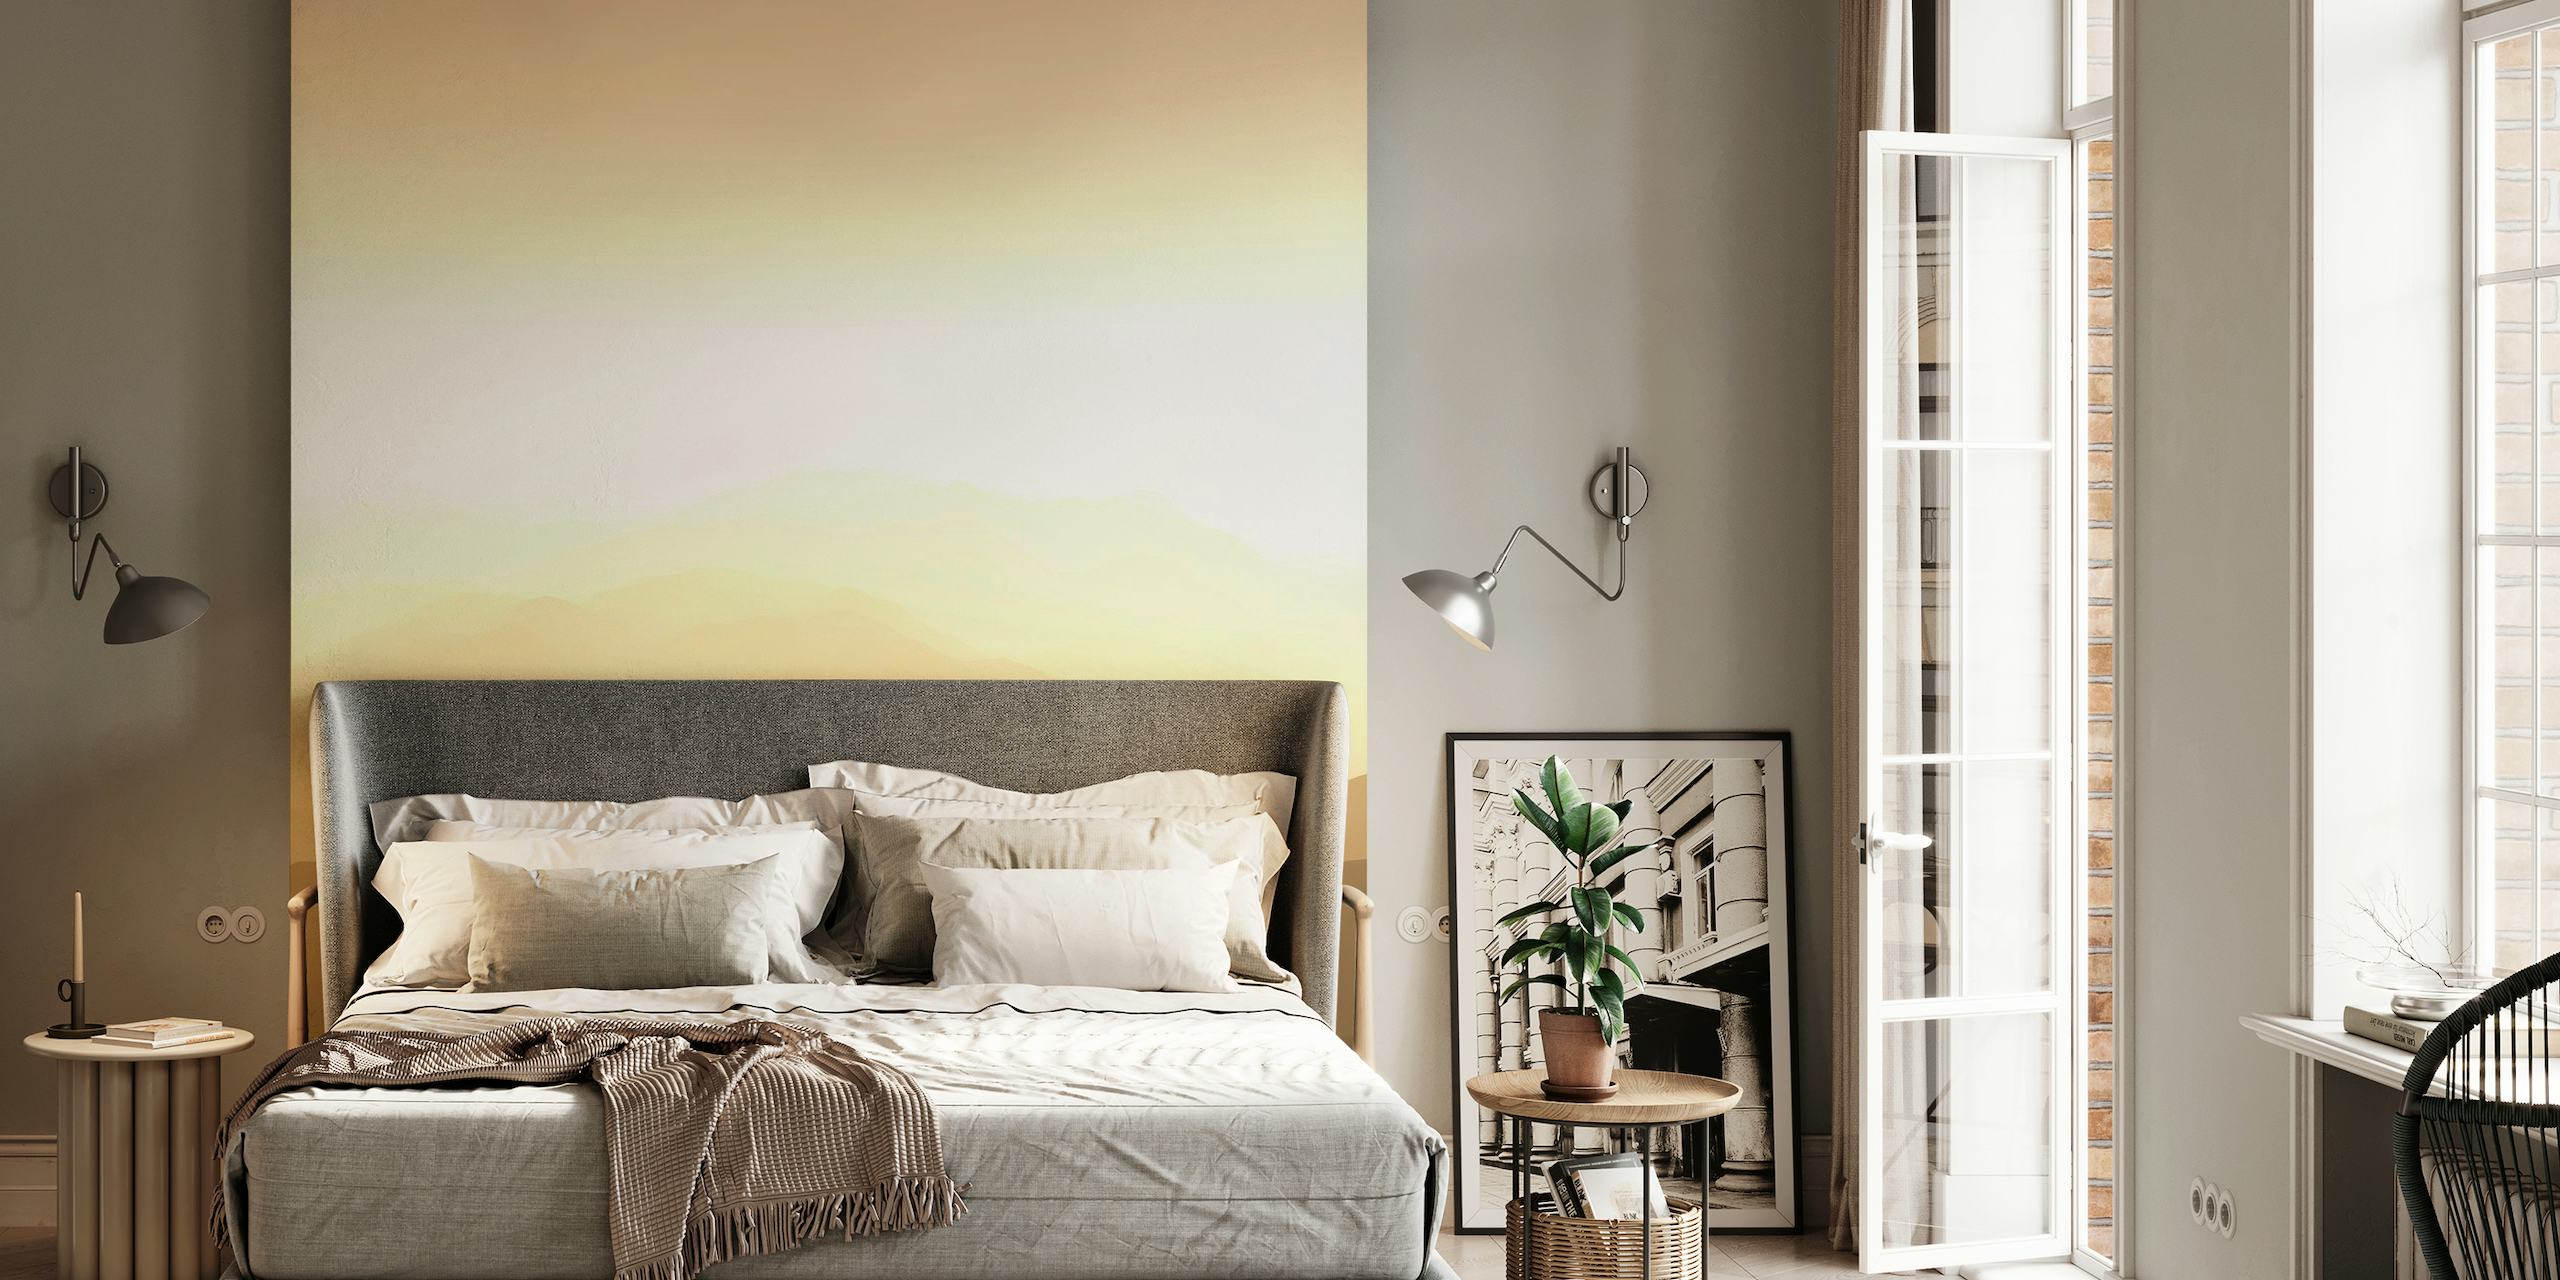 Serene Dawn II wall mural depicting a gentle sunrise over rolling hills with a calming gradient of warm colors.